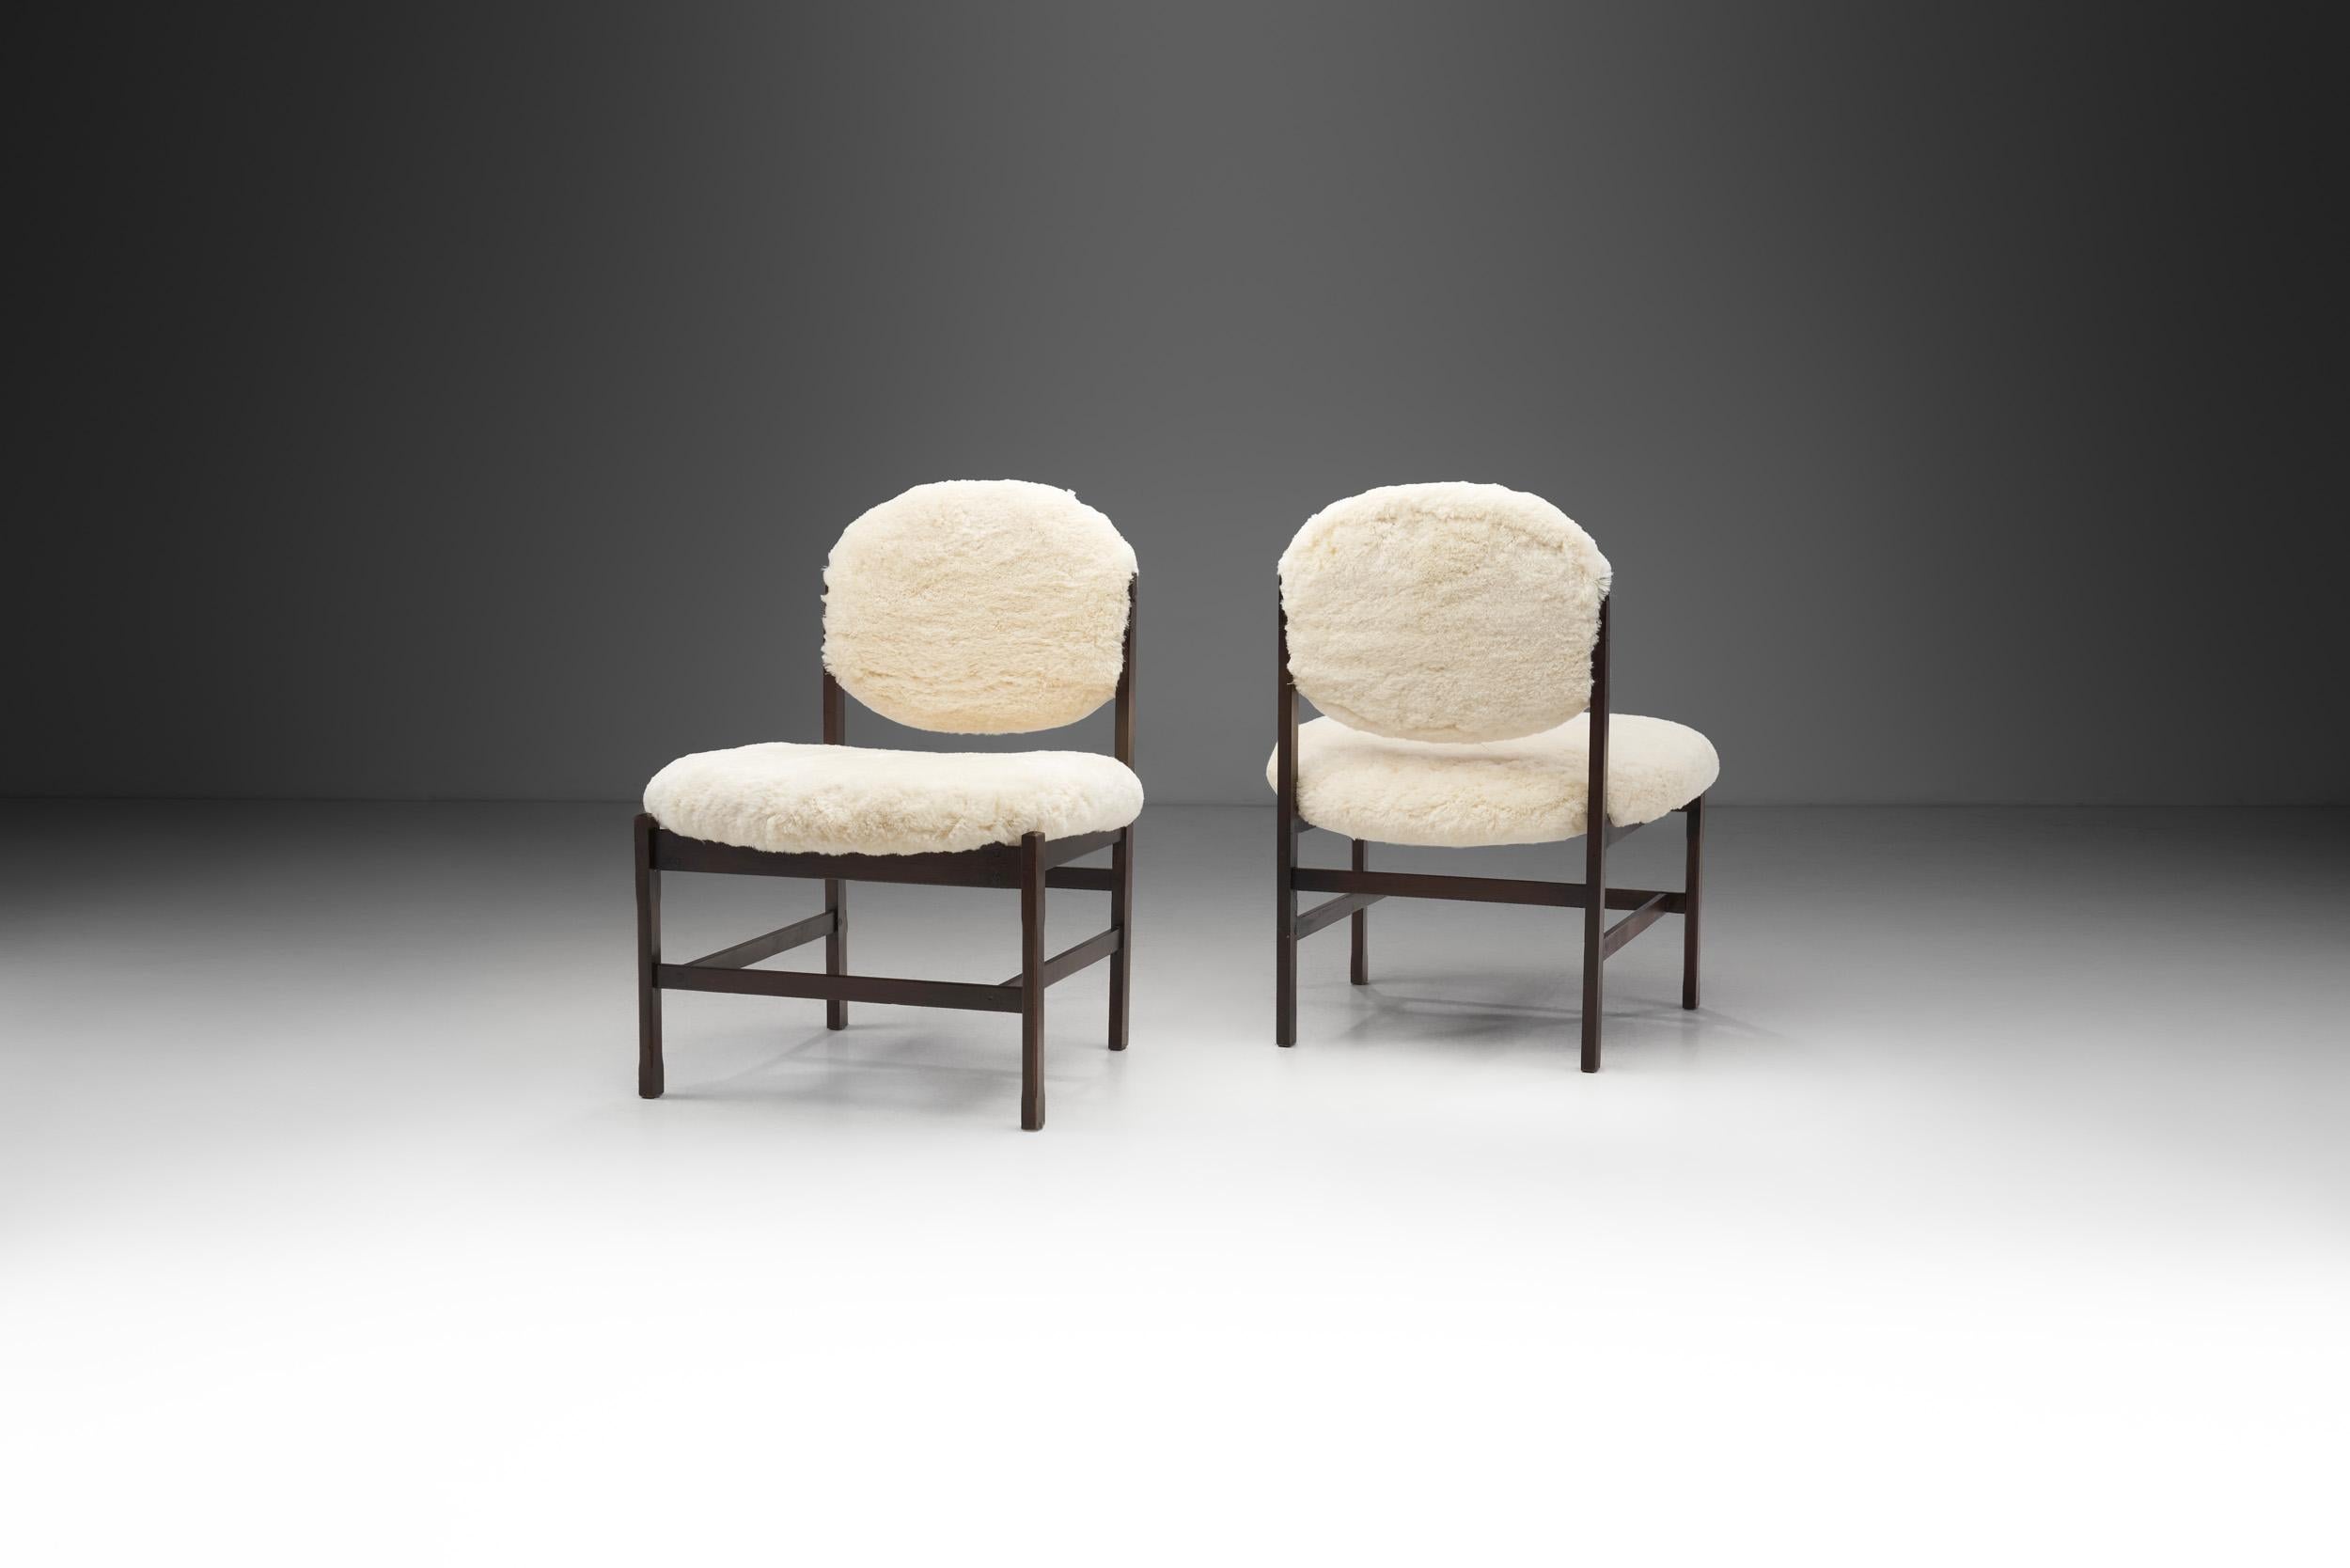 Mid-20th Century European Easy Chairs Upholstered in Wool, Europe ca 1950s For Sale